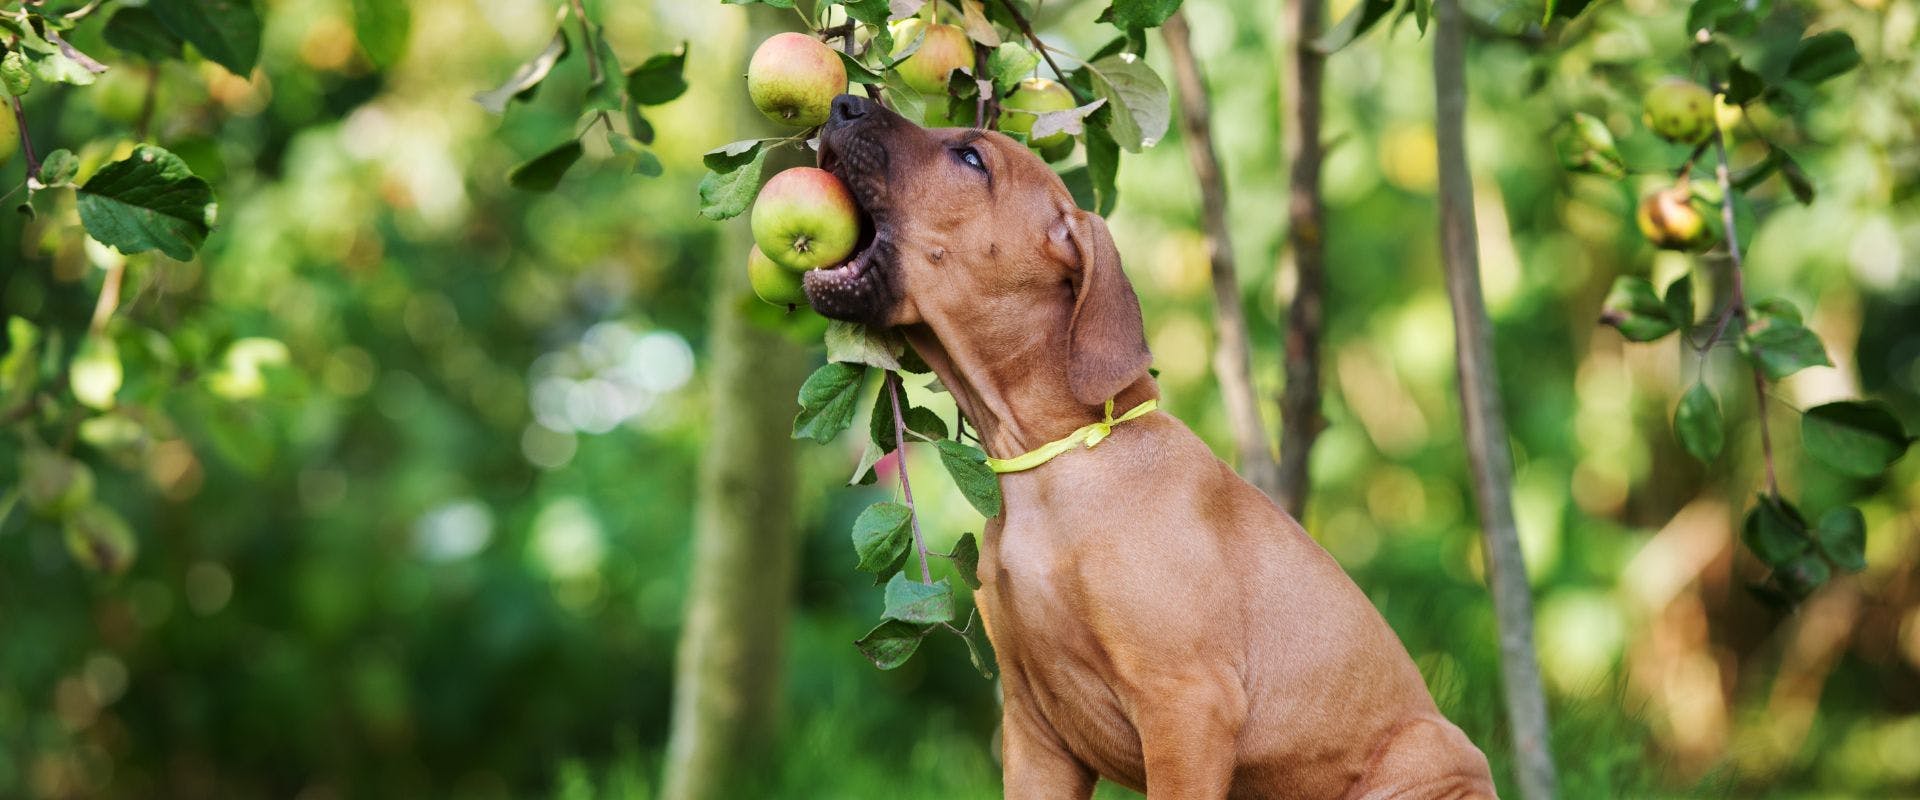 Brown dog eating an apple straight from the tree